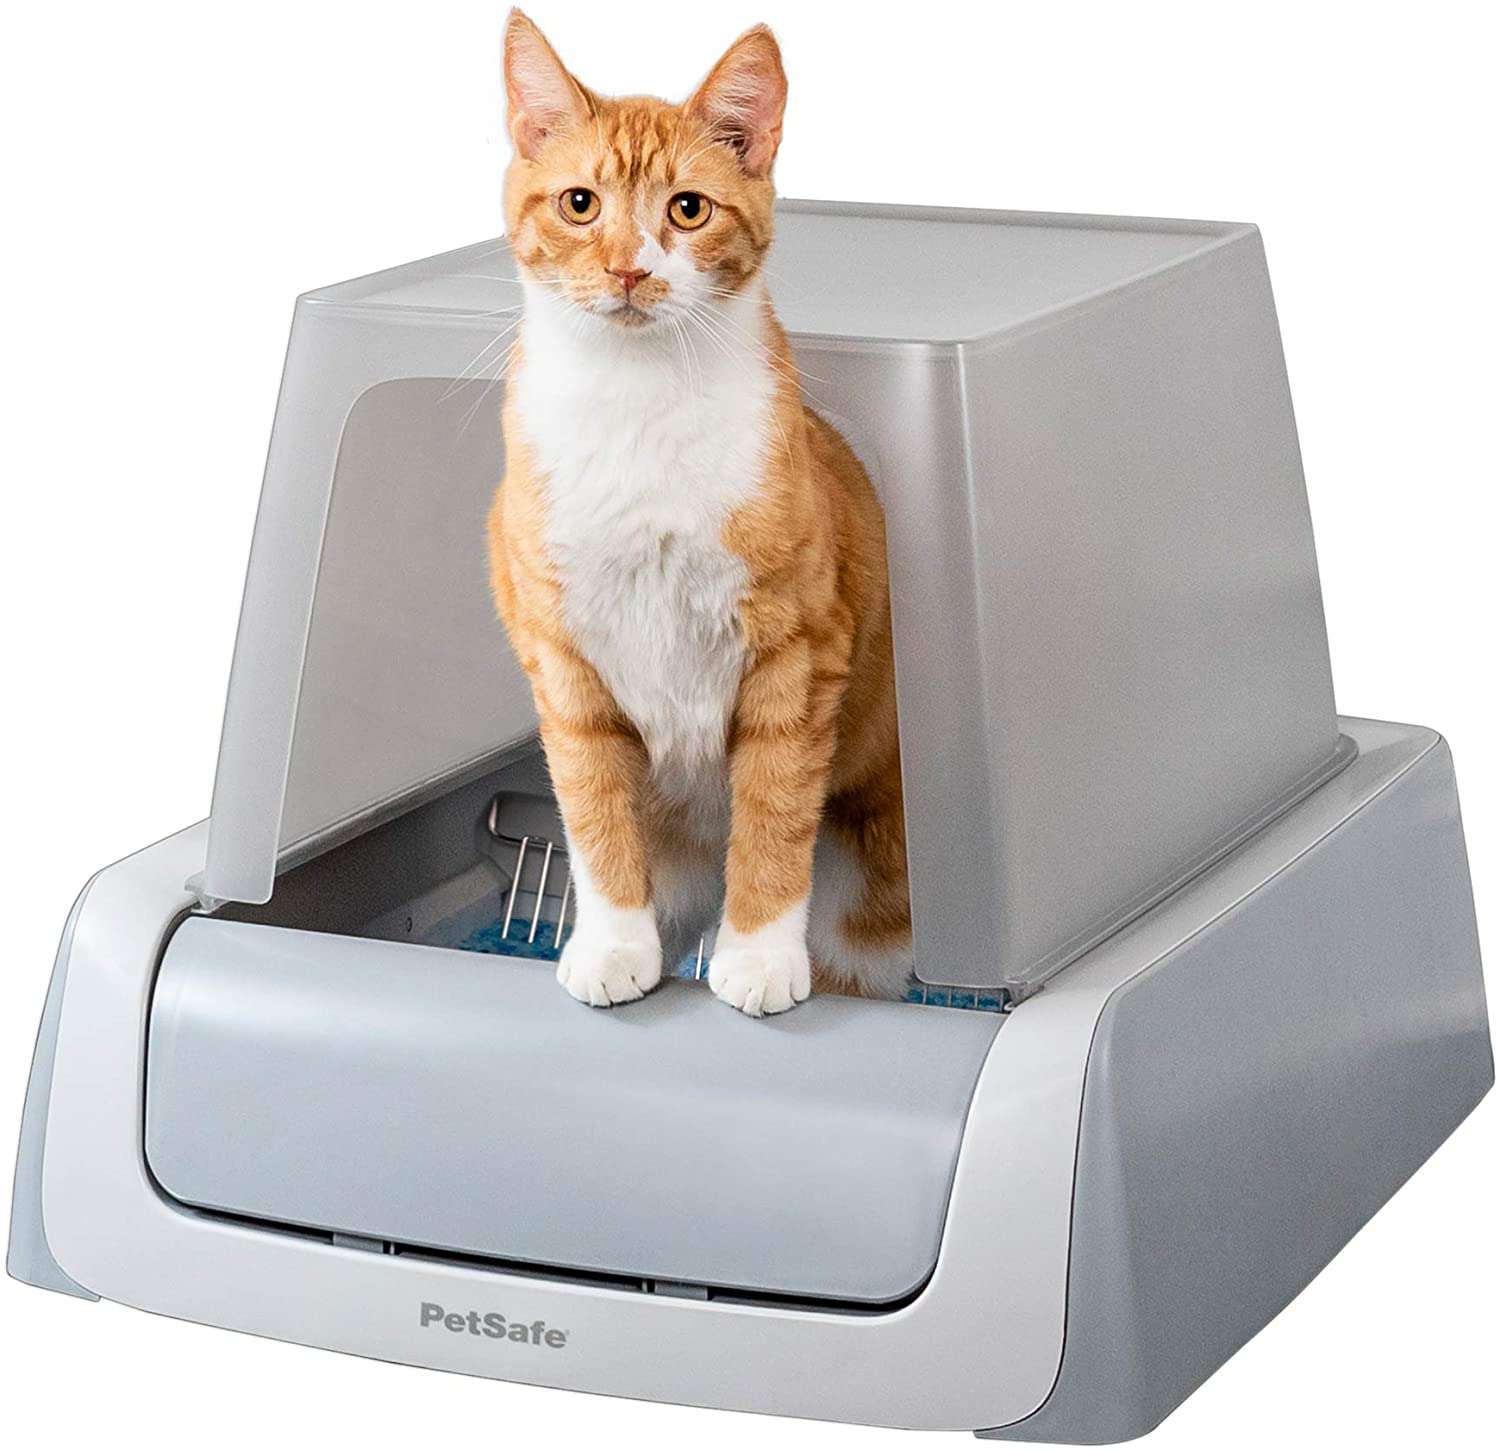 What is the best type of cat litter box?